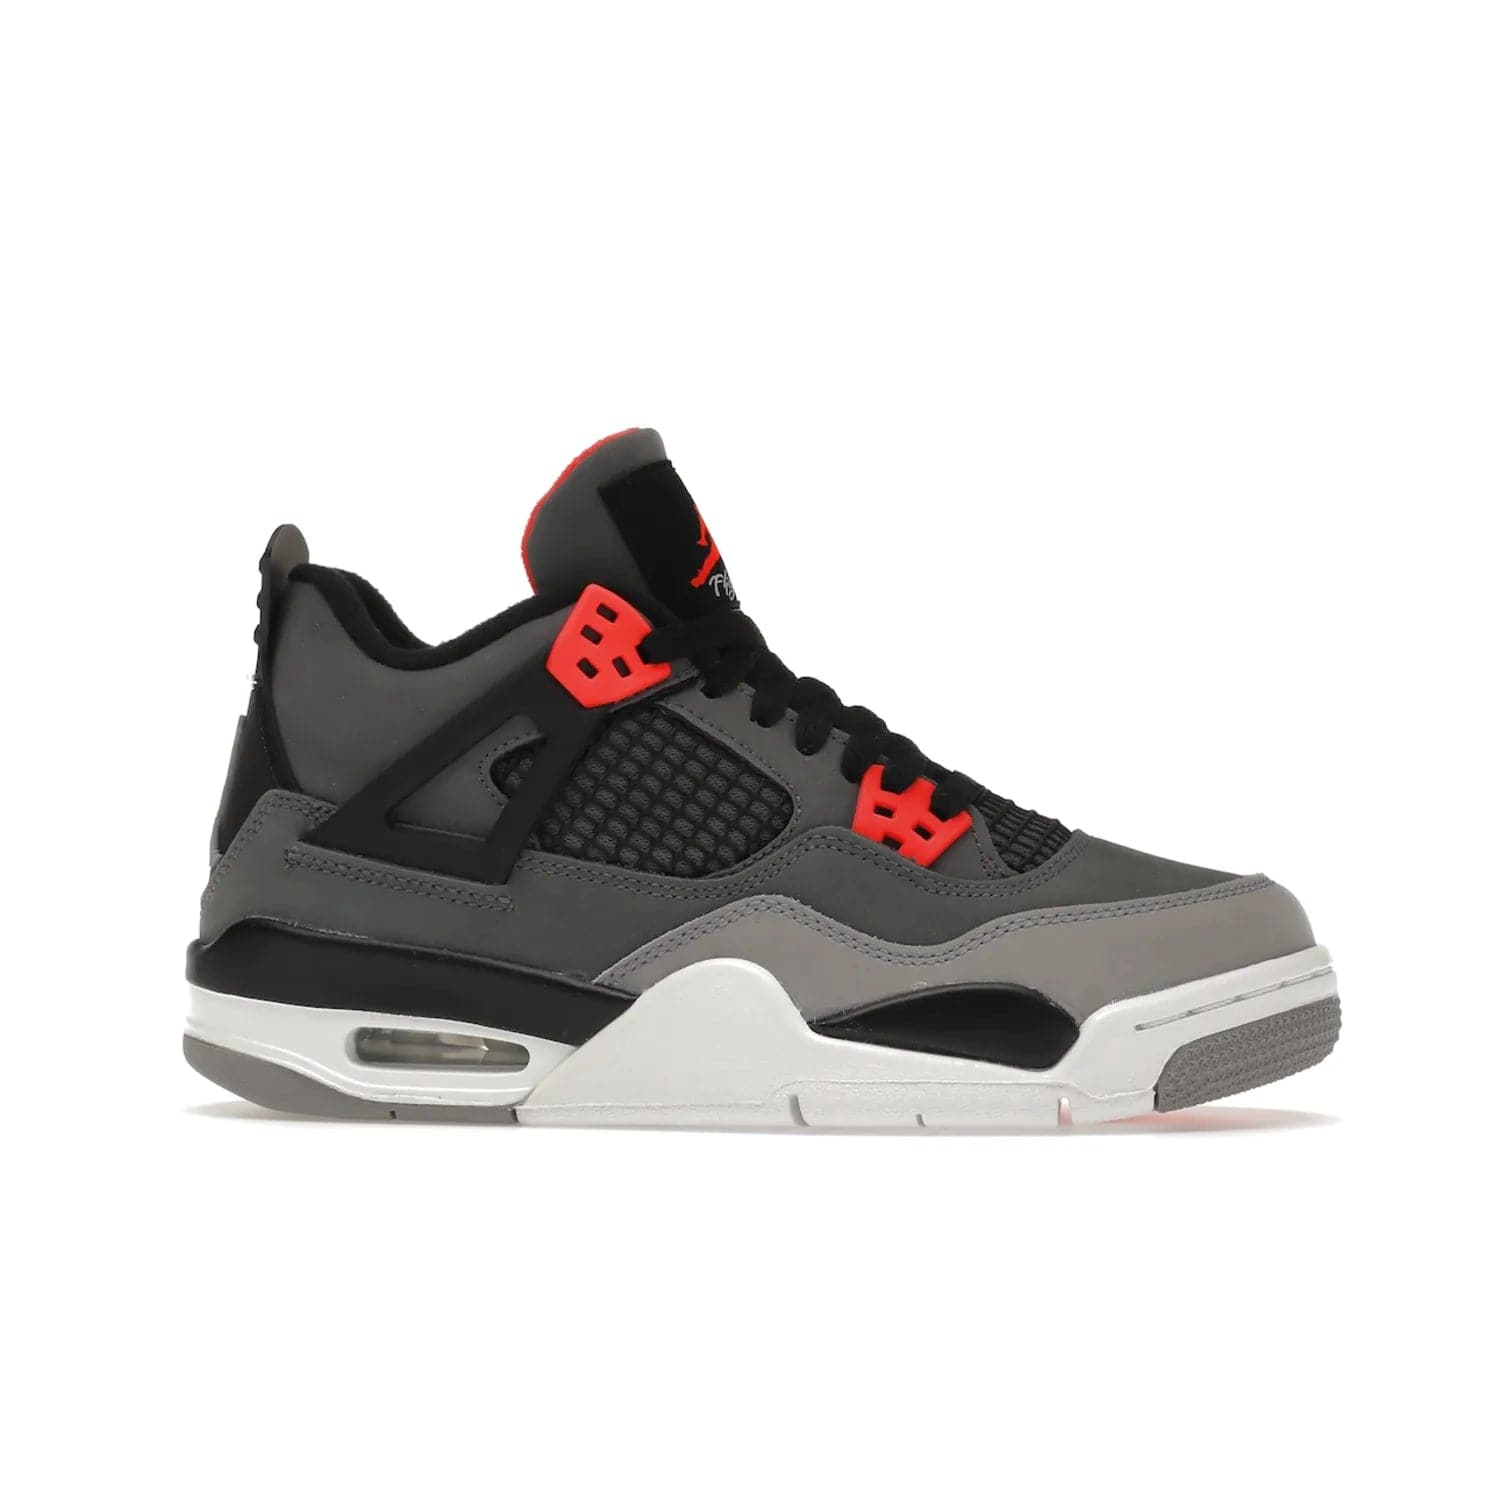 Jordan 4 Retro Infrared (GS) - Image 2 - Only at www.BallersClubKickz.com - Shop the Air Jordan 4 Retro Infrared (GS) for a classic silhouette with subtle yet bold features. Dark grey nubuck upper with lighter forefoot overlay, black accents, Infrared molded eyelets & woven tongue tag. Available June 2022.